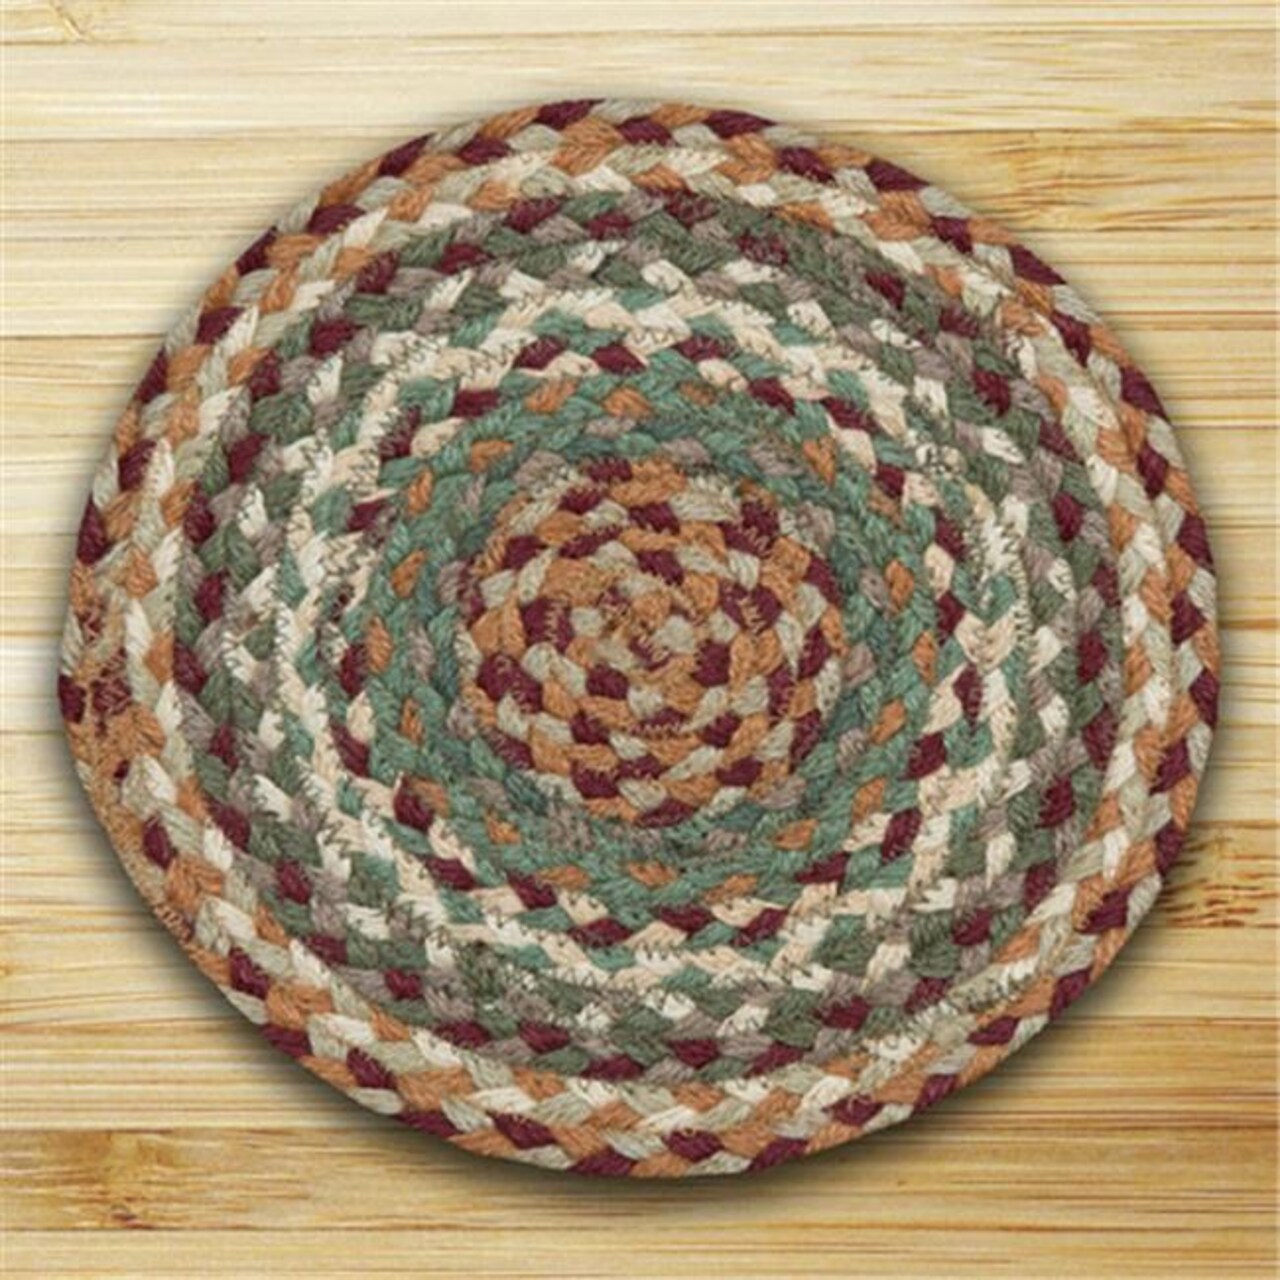 Earth Rugs 00-413 Miniature Swatch - Buttermilk and Cranberry